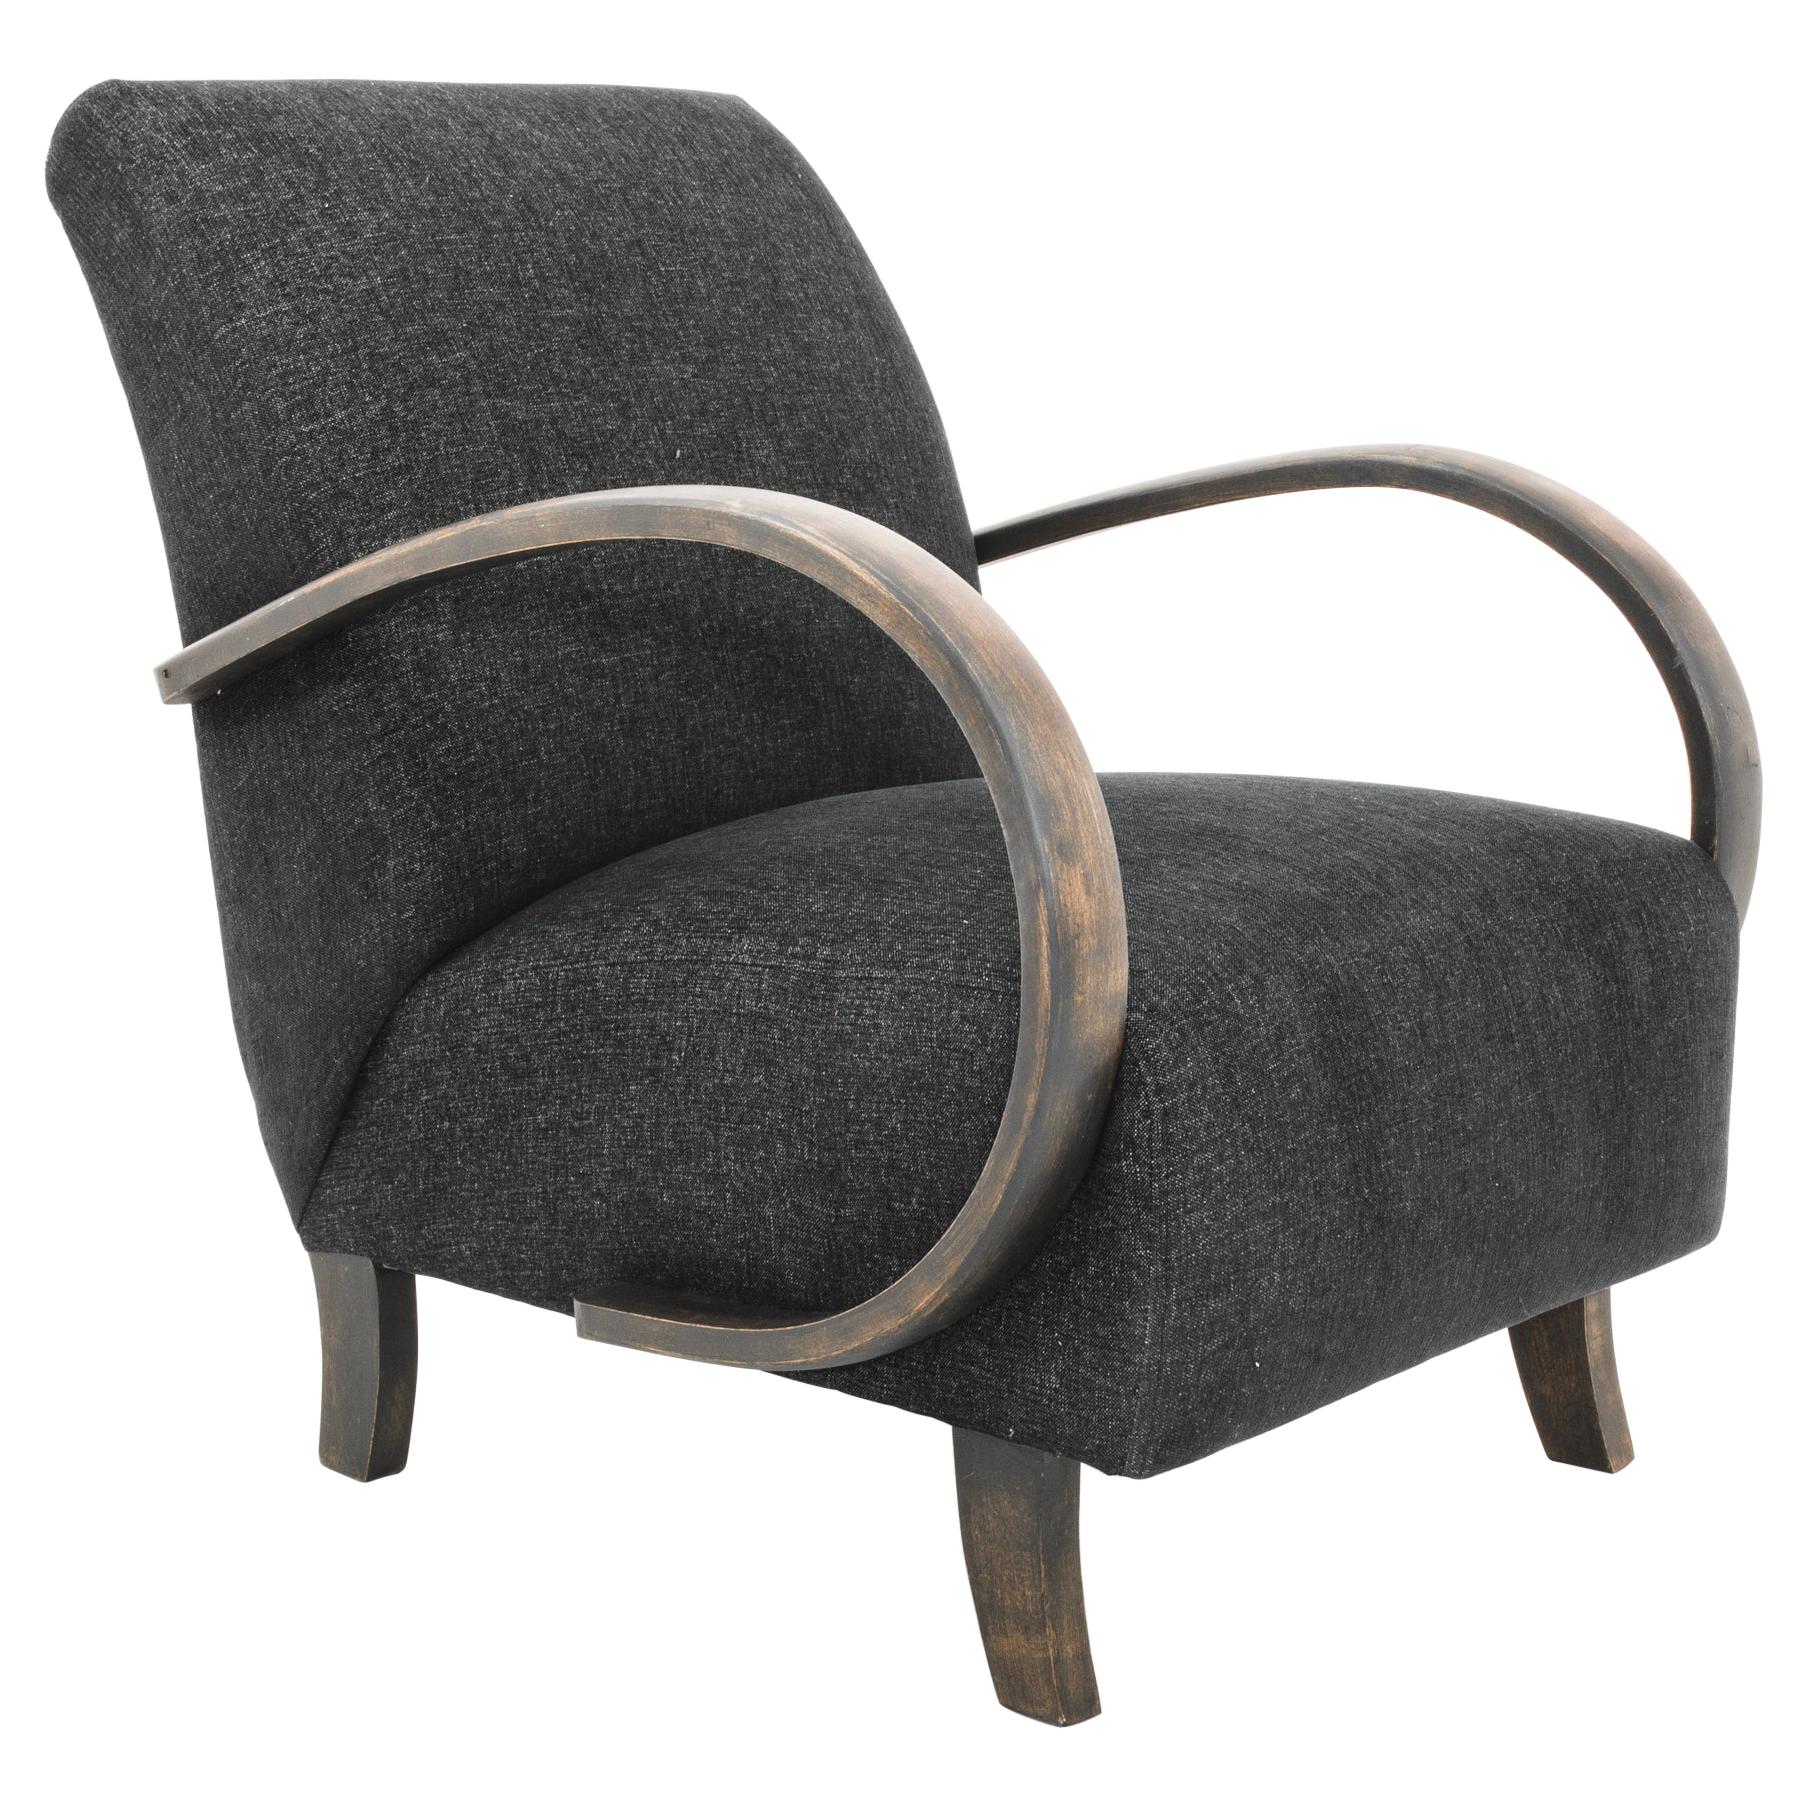 1960s Upholstered Armchair by Jindrich Halabala